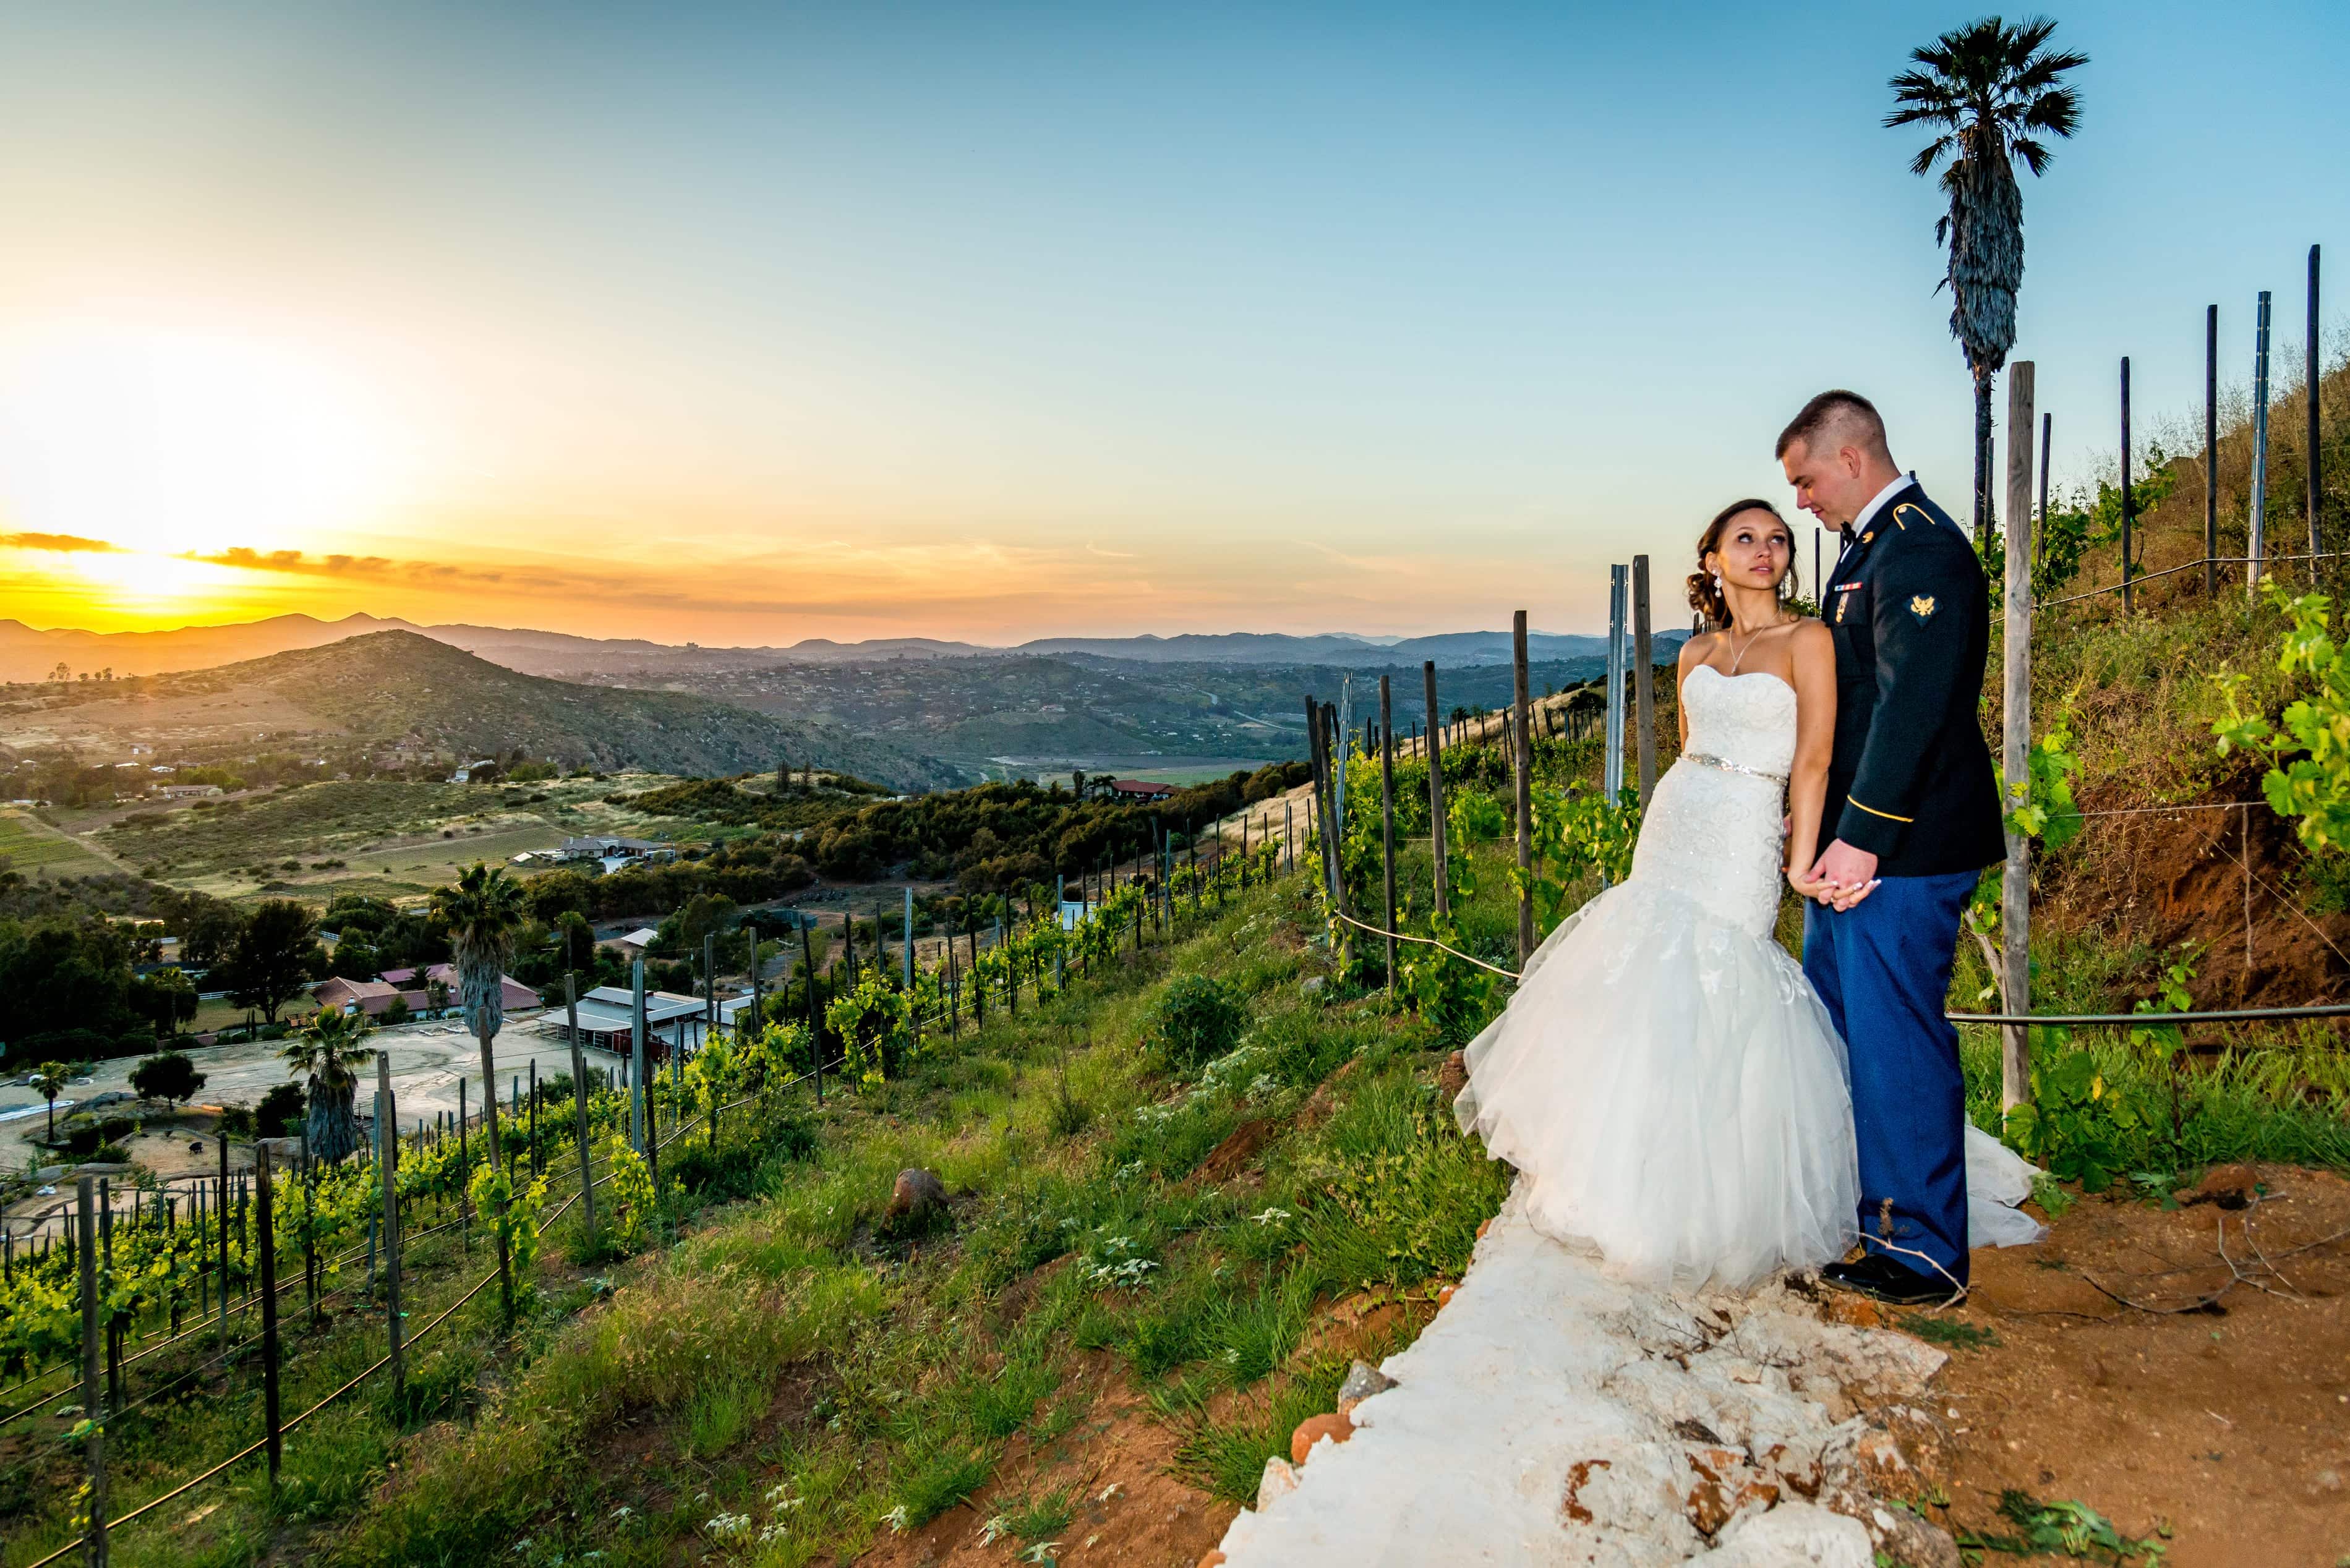 Bride and groom at a winery by the vines.